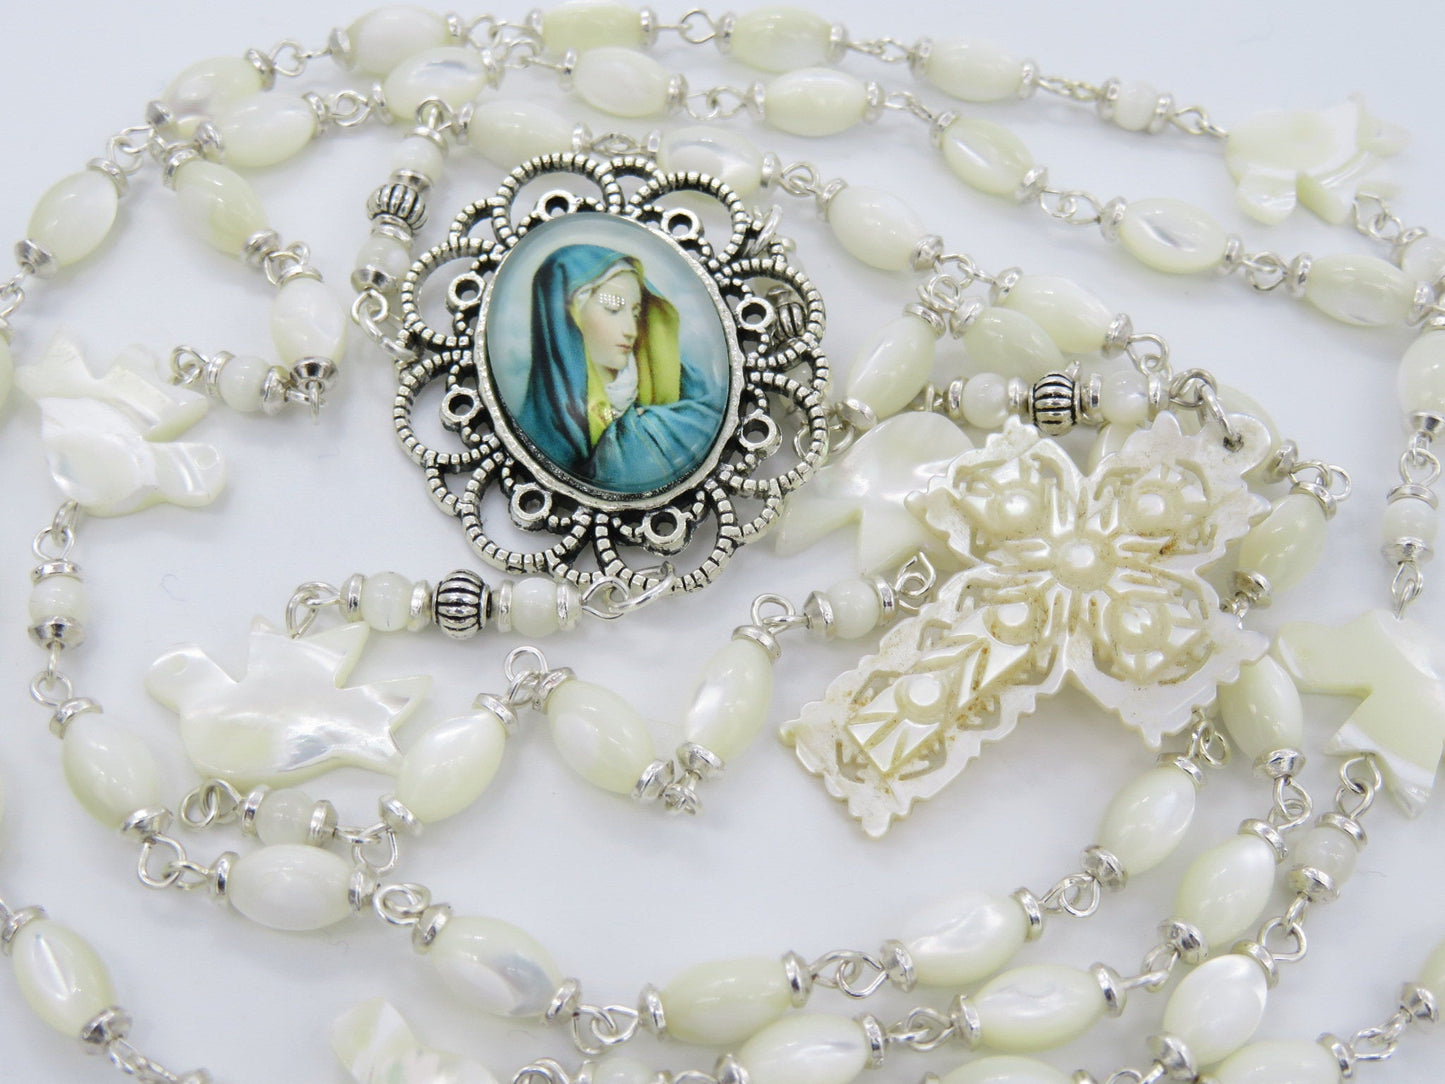 Genuine Mother of Pearl Our Lady of Sorrows Rosary beads, 7 sorrows rosary beads, prayer beads, Holy Spirit Rosaries, Sacramental gift.